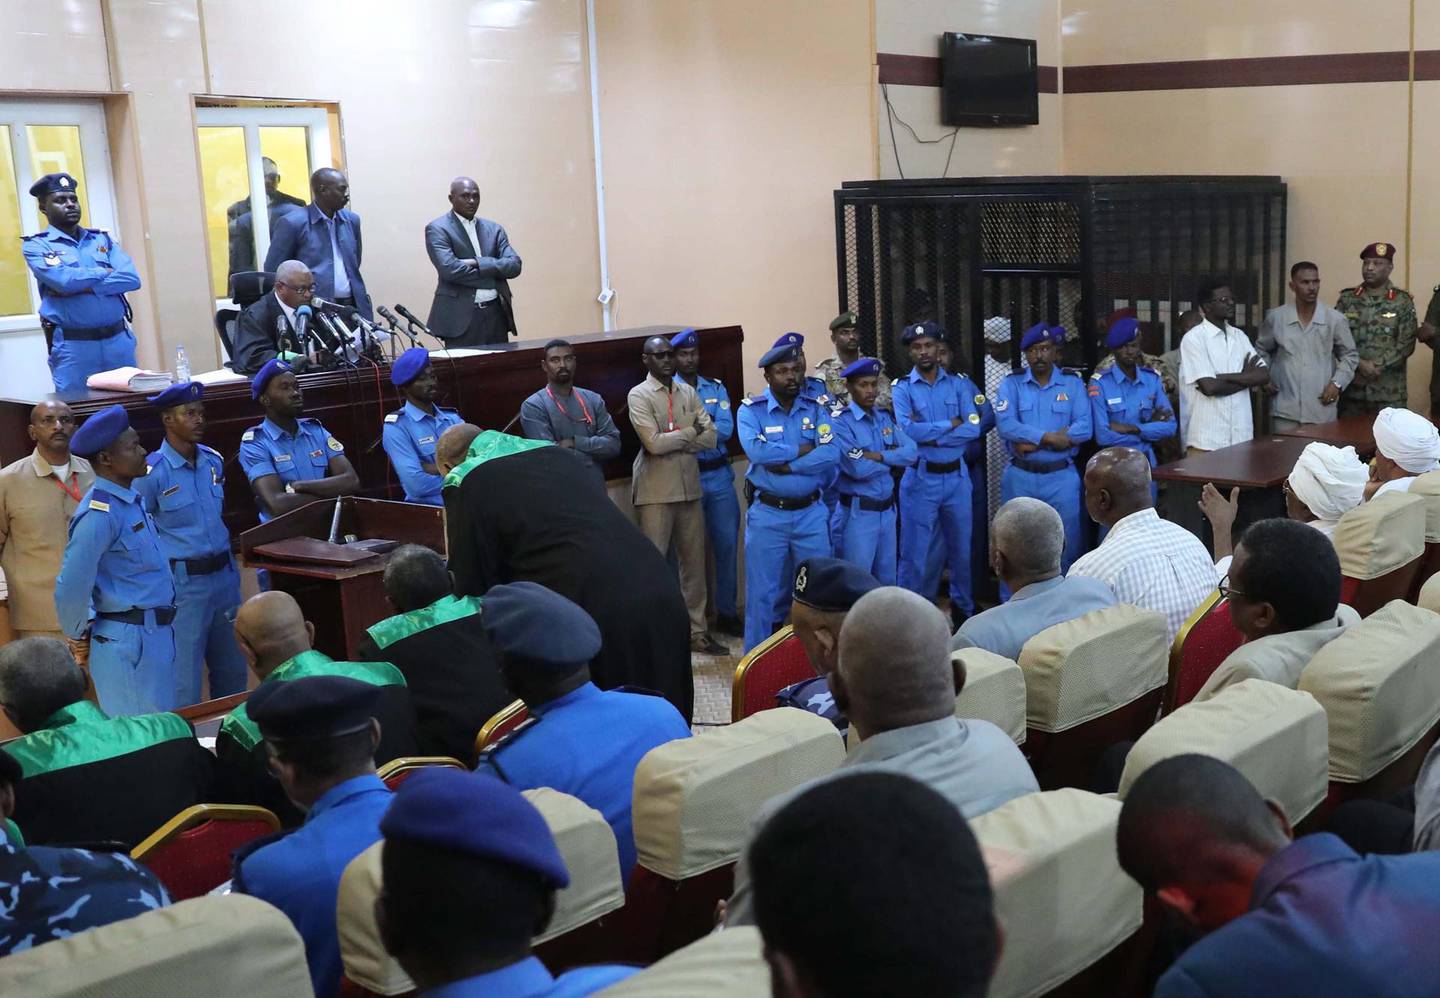 epa08070522 Presiding judge Al-Sadiq Abdelrahman (top L) reads the verdict against Sudan's ousted president Omar Hassan al-Bashir in the defendant's cage (top C) during his trial in Khartoum, Sudan, 14 December 2019. A Sudanese court in Khartoum on 14 December 2019 found former president al-Bashir guilty of money laundering and sentenced him to two years in rehabilitation facility. The verdict is the first in several cases against al-Bashir who was ousted in April 2019 after some 30 years in power.  EPA/MORWAN ALI